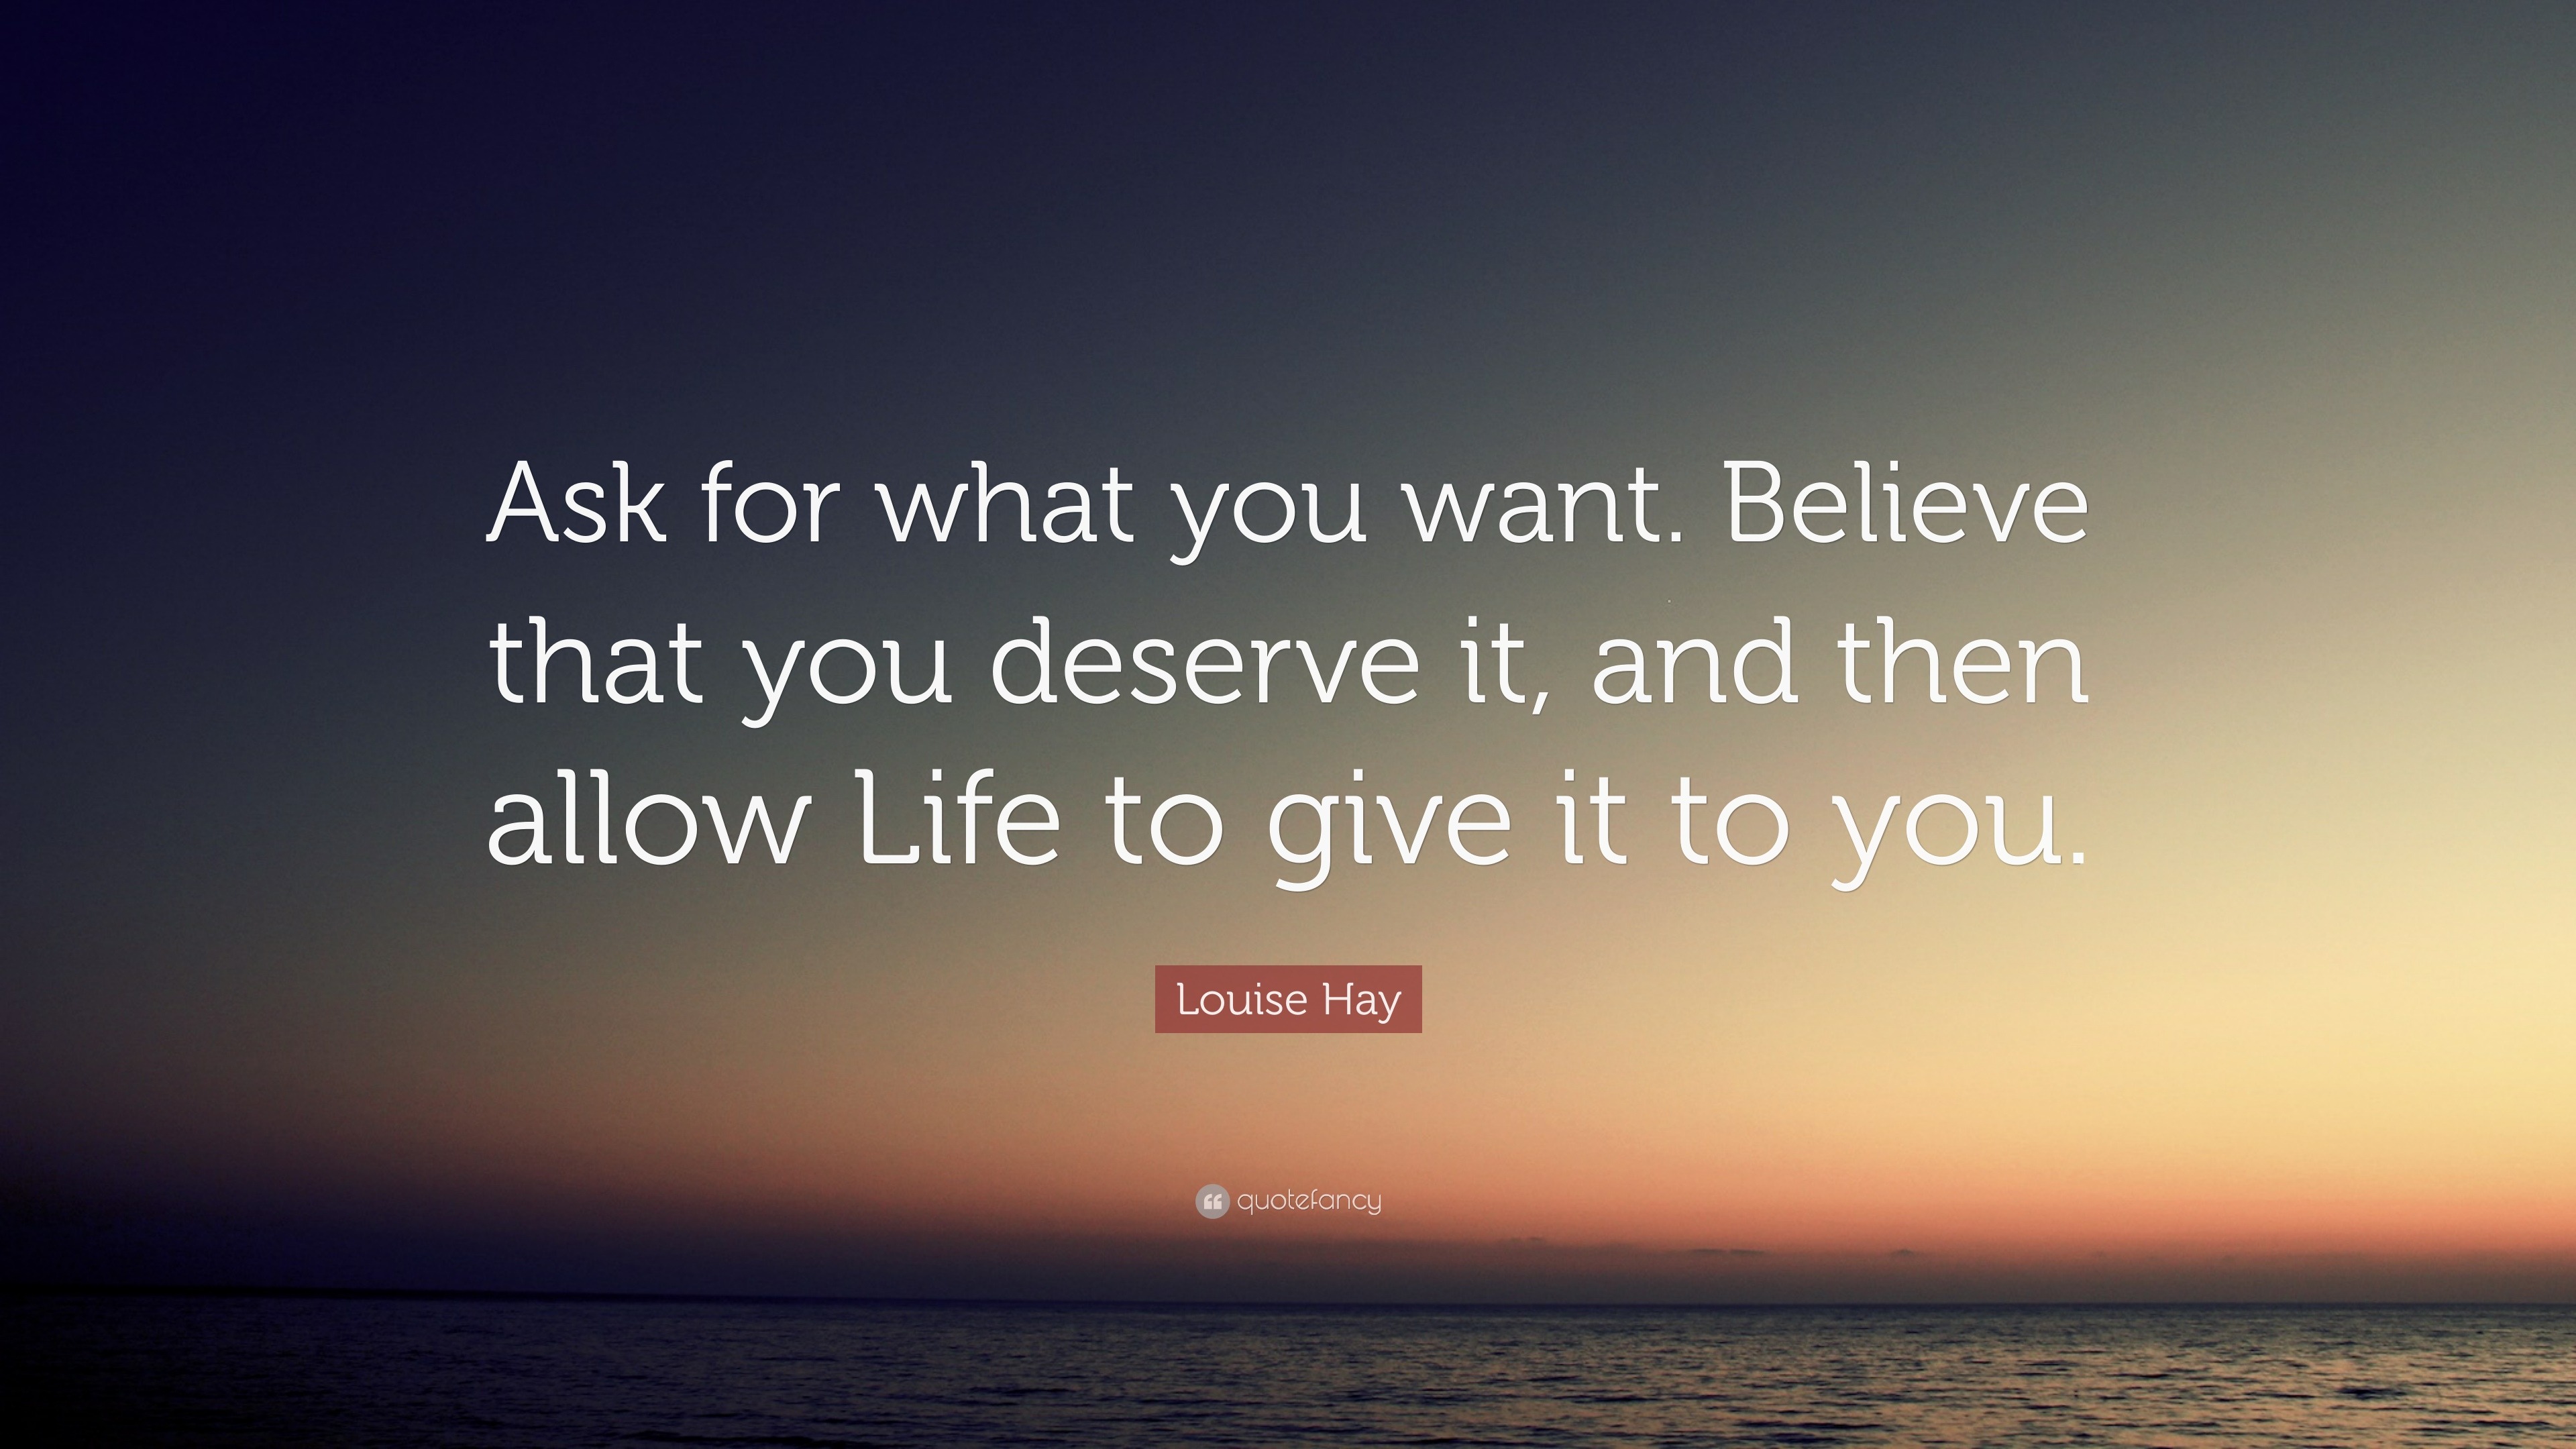 Louise Hay Quote Ask For What You Want Believe That You Deserve It And Then Allow